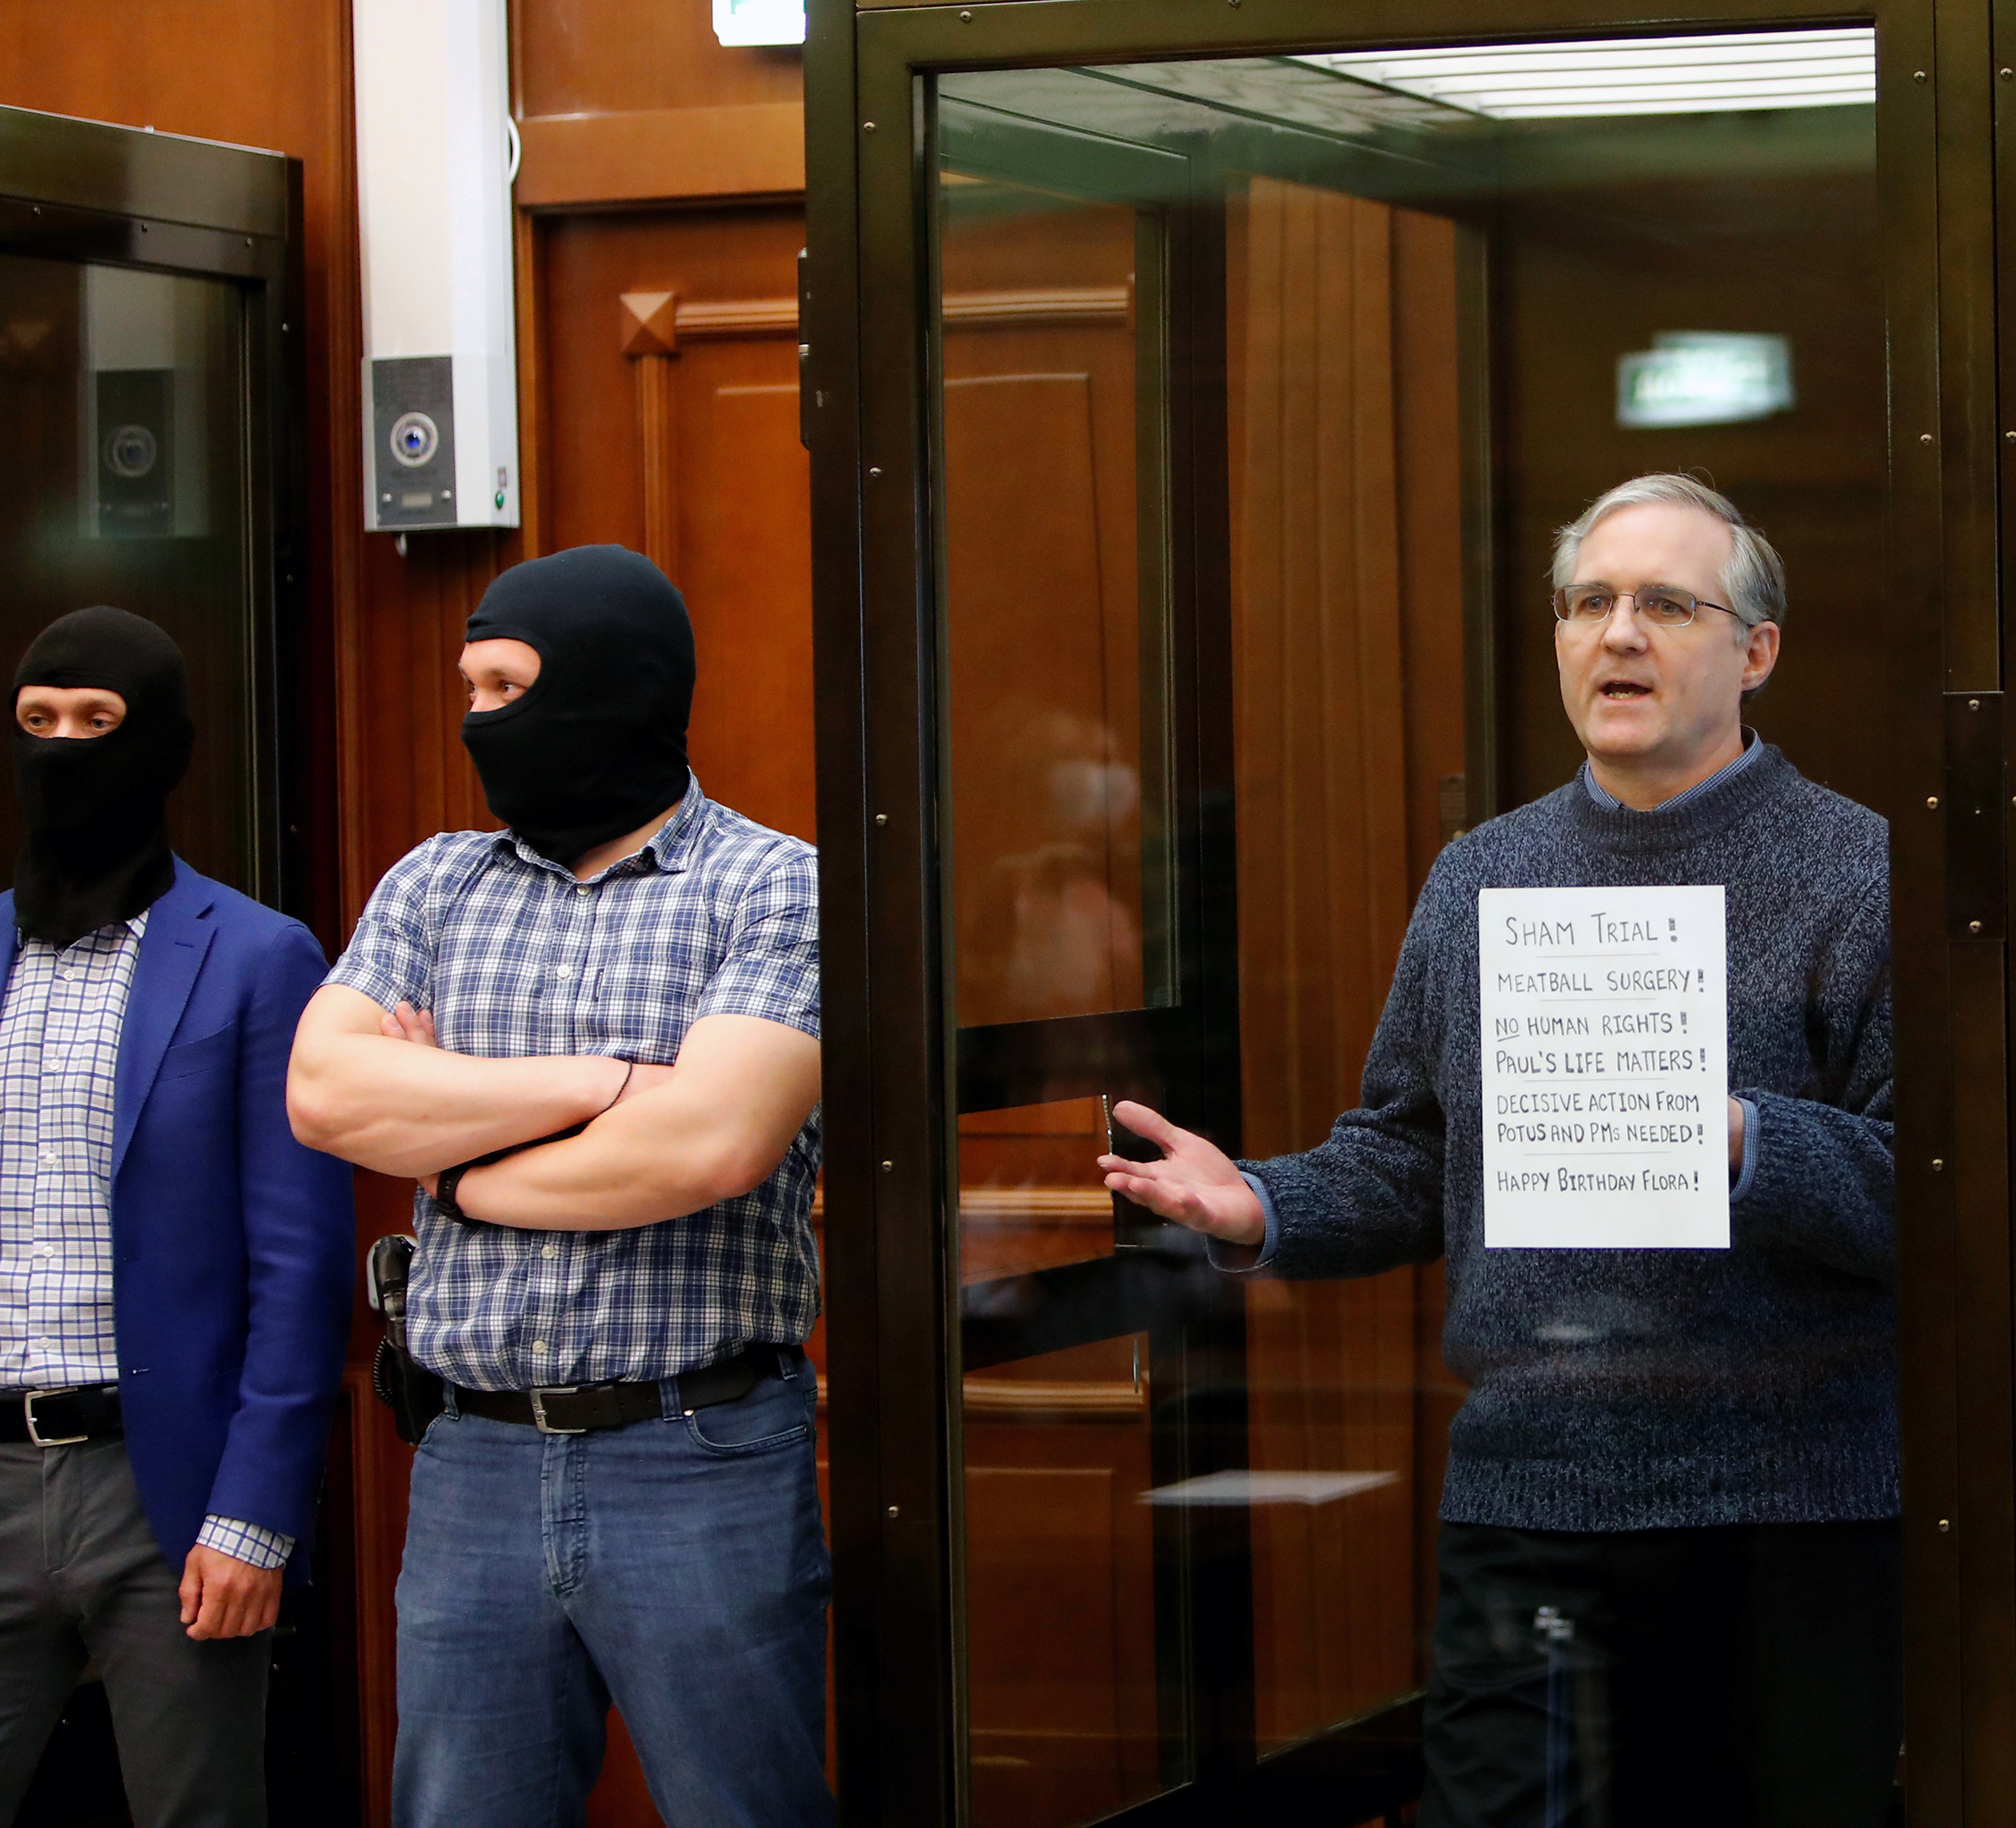 PHOTO: Former U.S. Marine Paul Whelan, who was detained and accused of espionage, holds a sign as he stands inside a defendants' cage during his verdict hearing in Moscow, June 15, 2020.